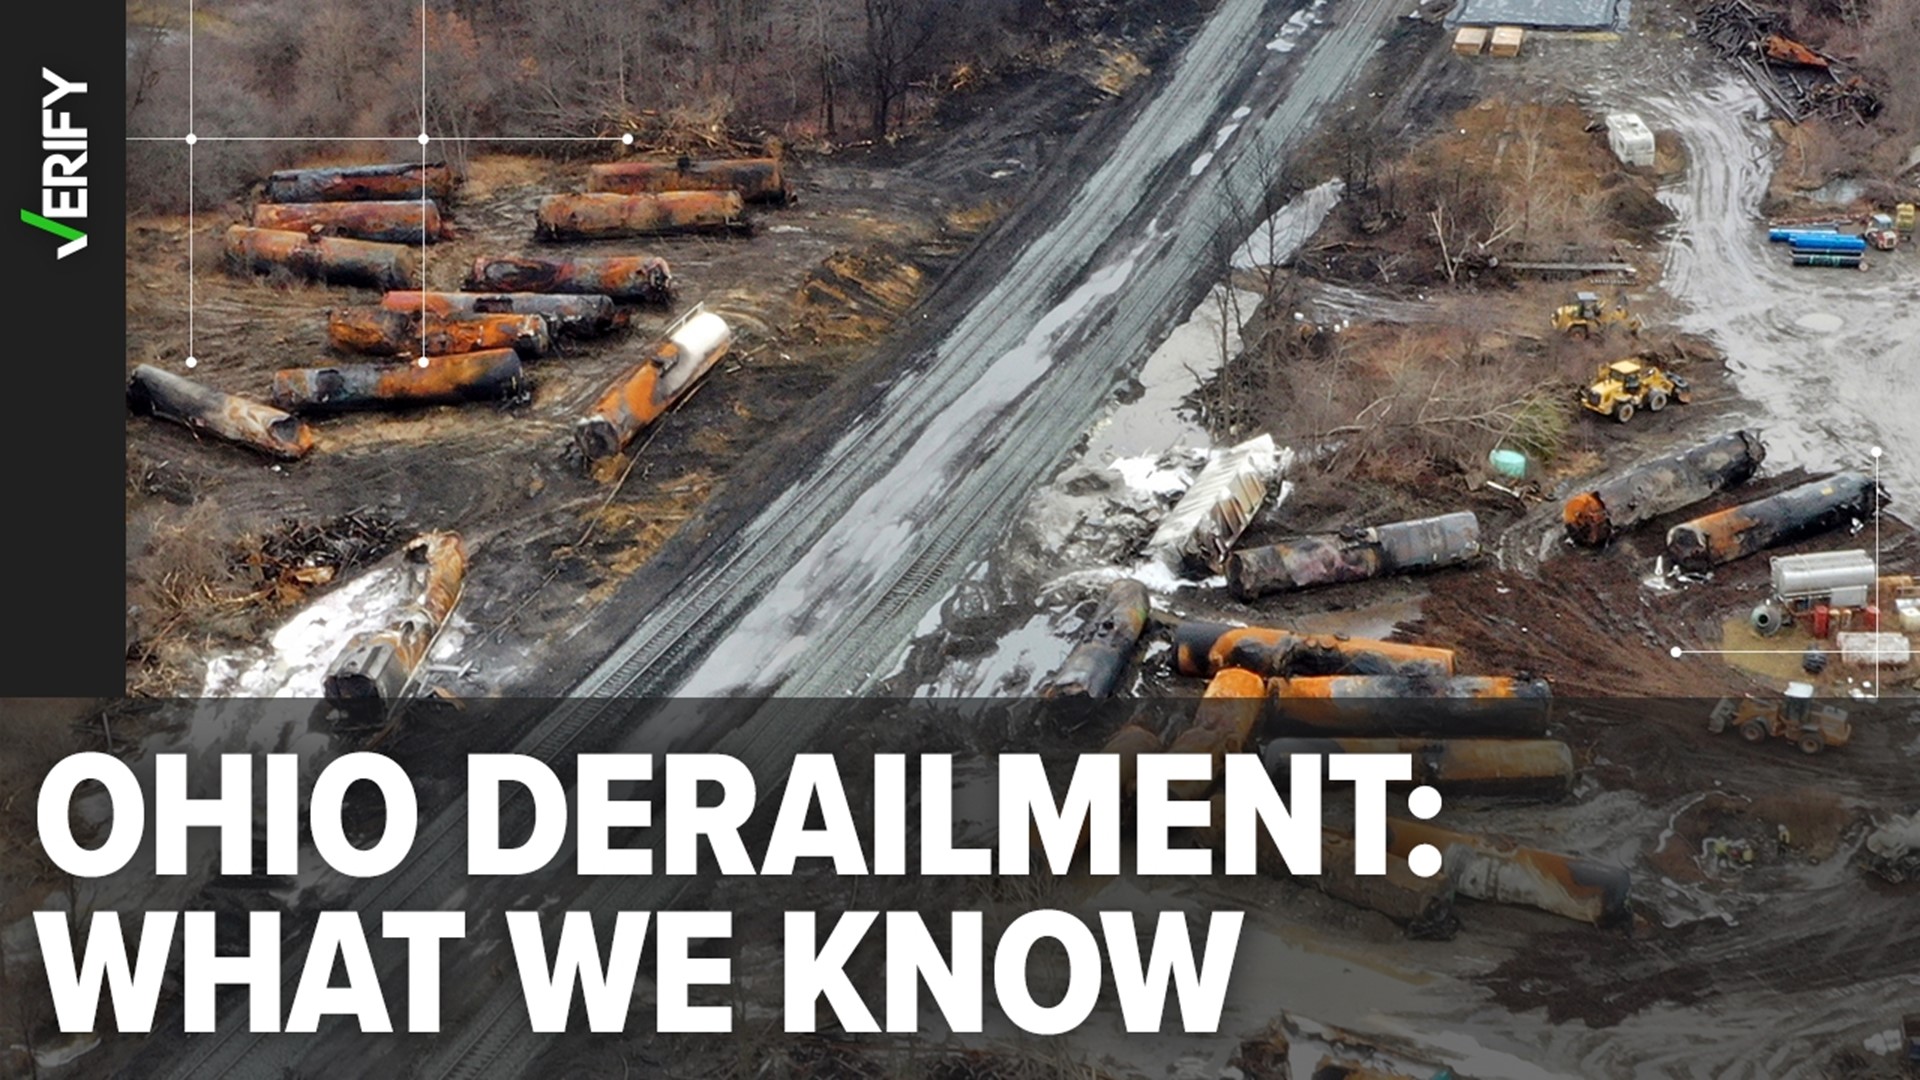 A train carrying toxic chemicals derailed near East Palestine, Ohio. Here's what we know as fact, and what's unconfirmed rumor.